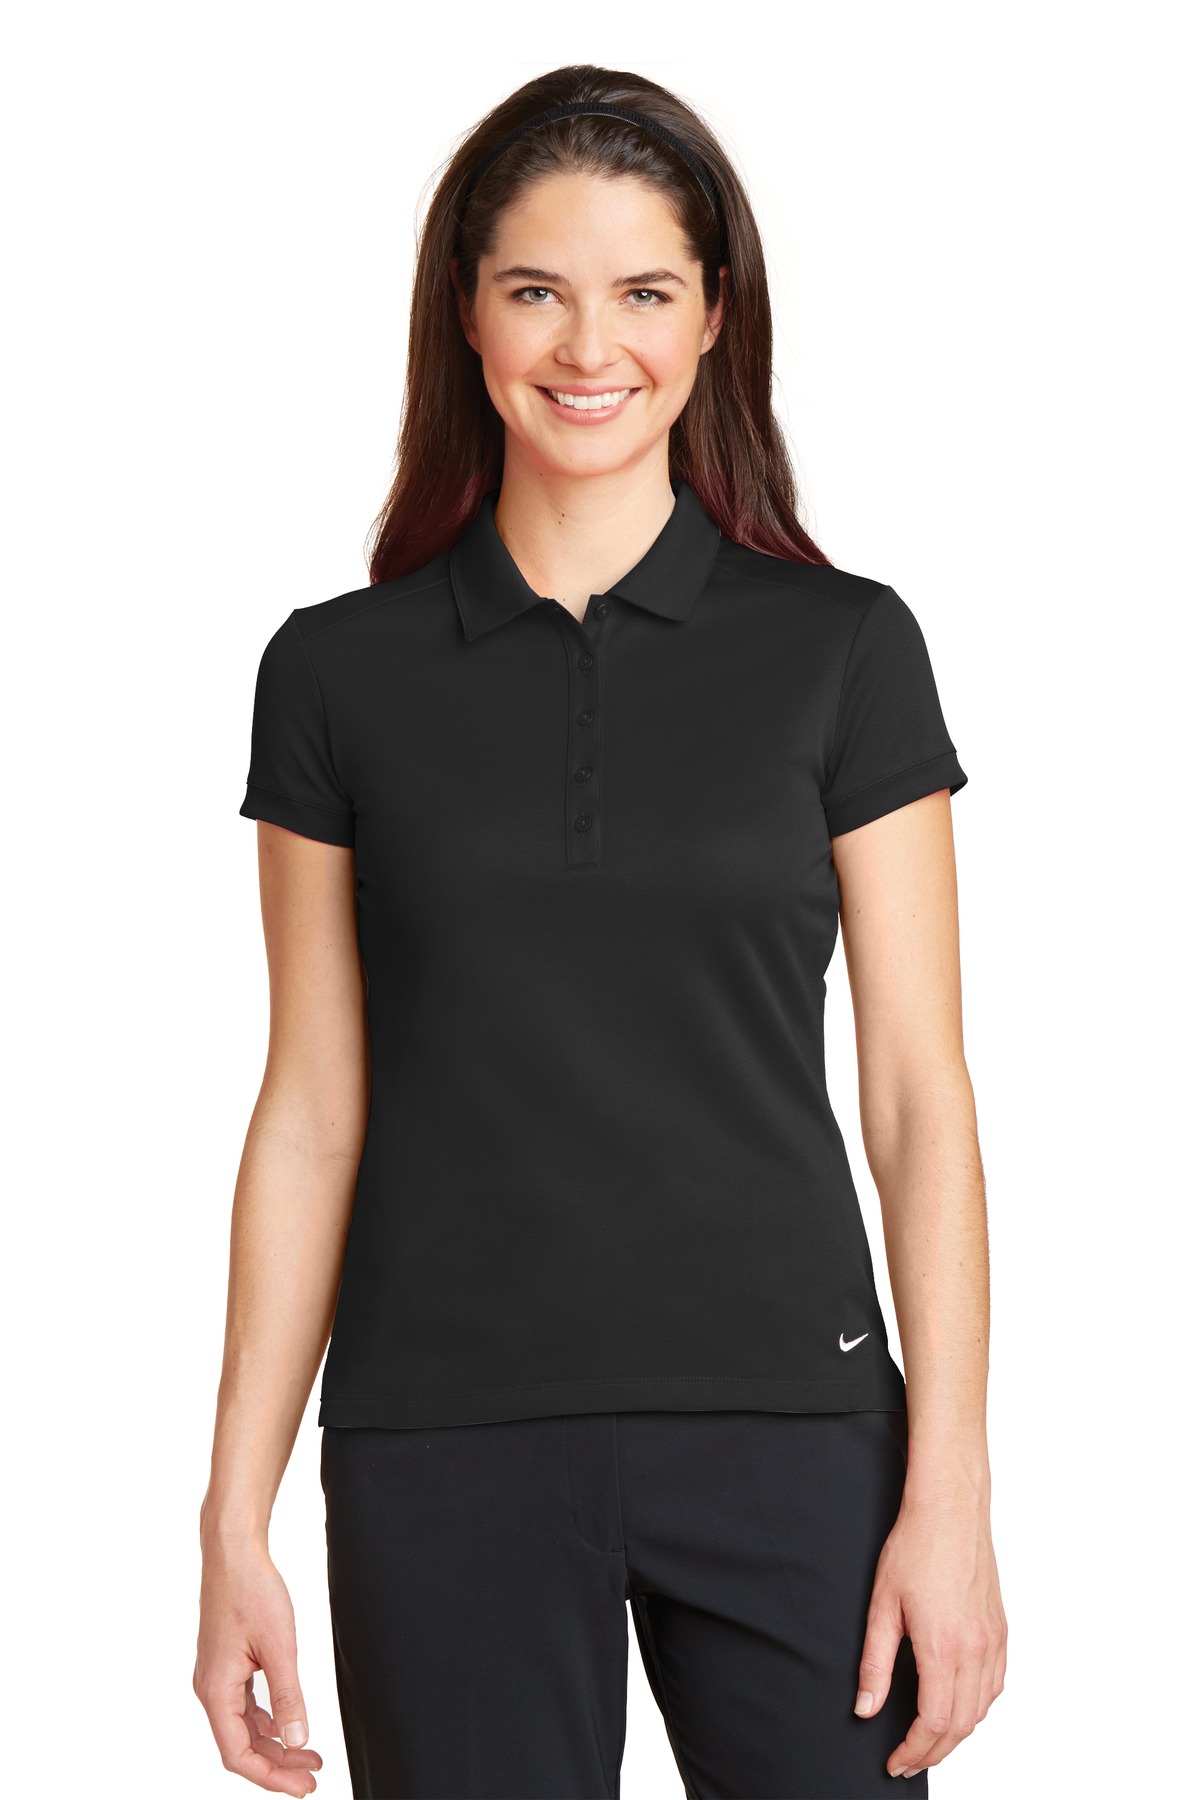 Nike Ladies Dri-FIT Solid Icon Pique Modern Fit Polo....